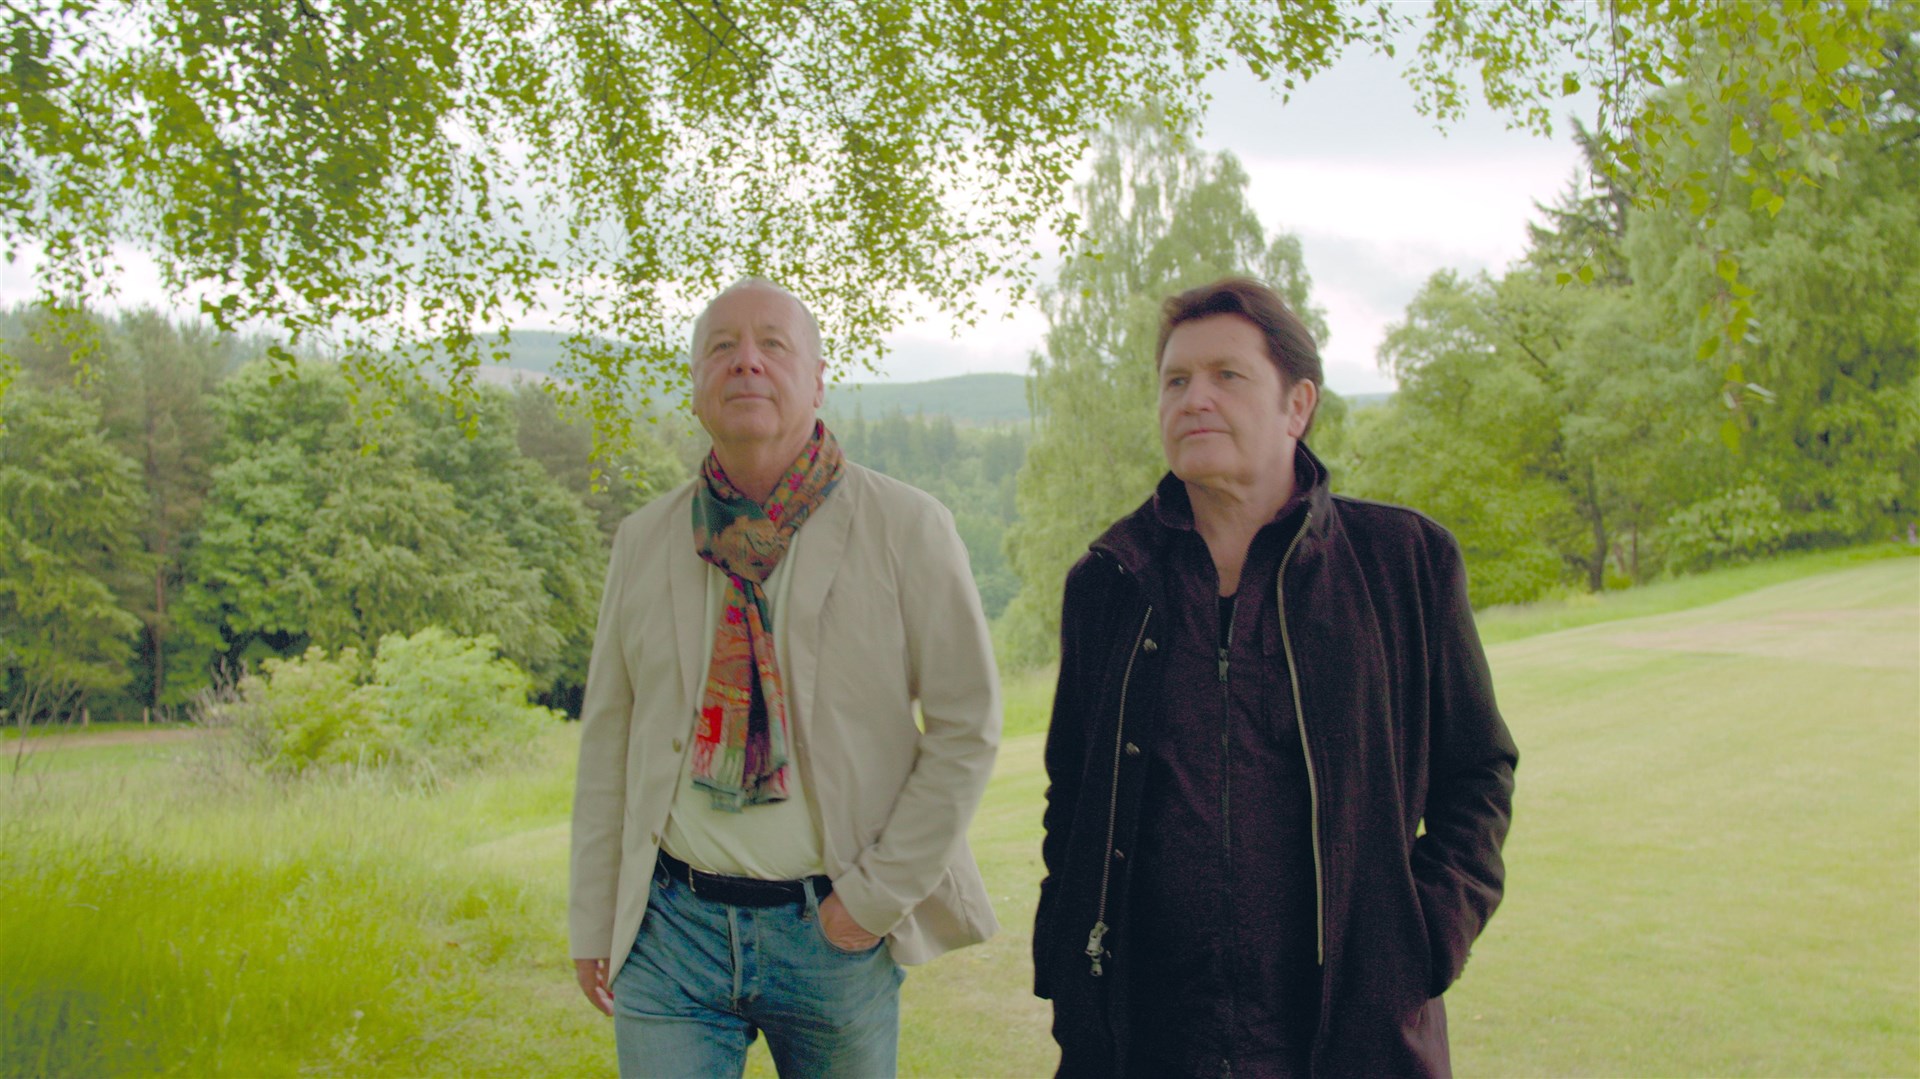 Jim Kerr and Charlie Burchill at the Speyside estate of The Macallan.